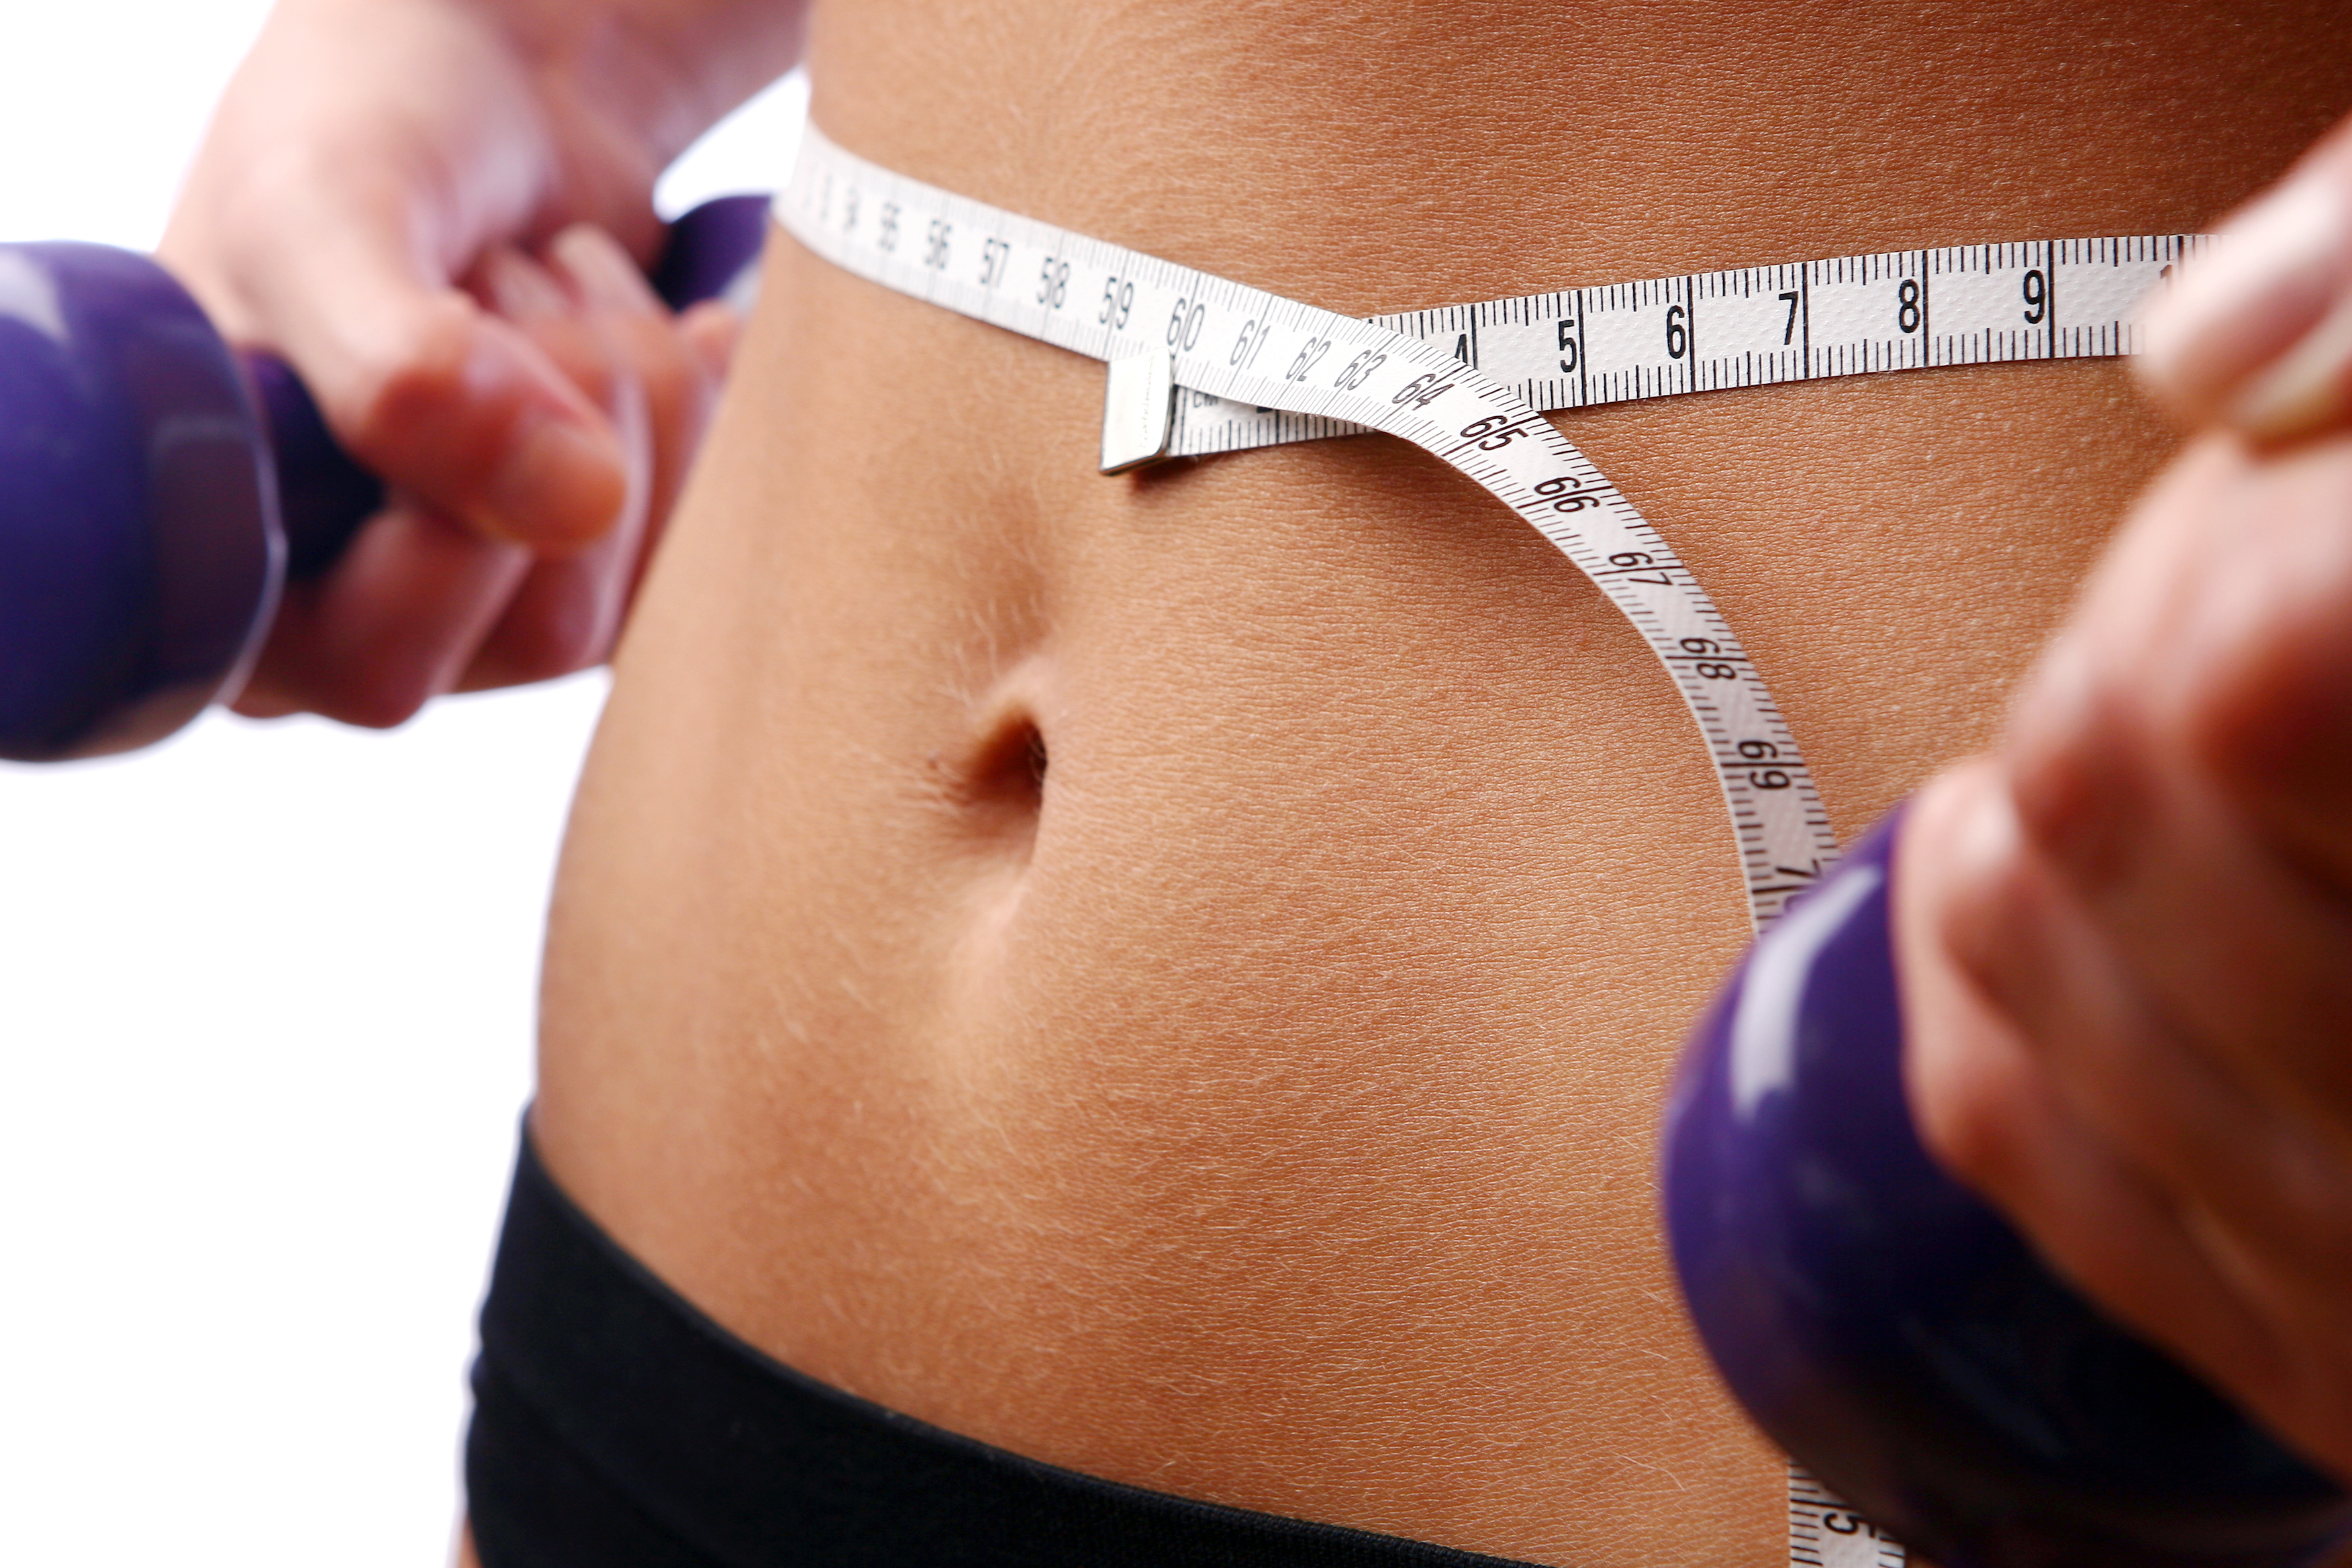 Here's How to Lose Lower Belly Fat in 5 Simple Ways